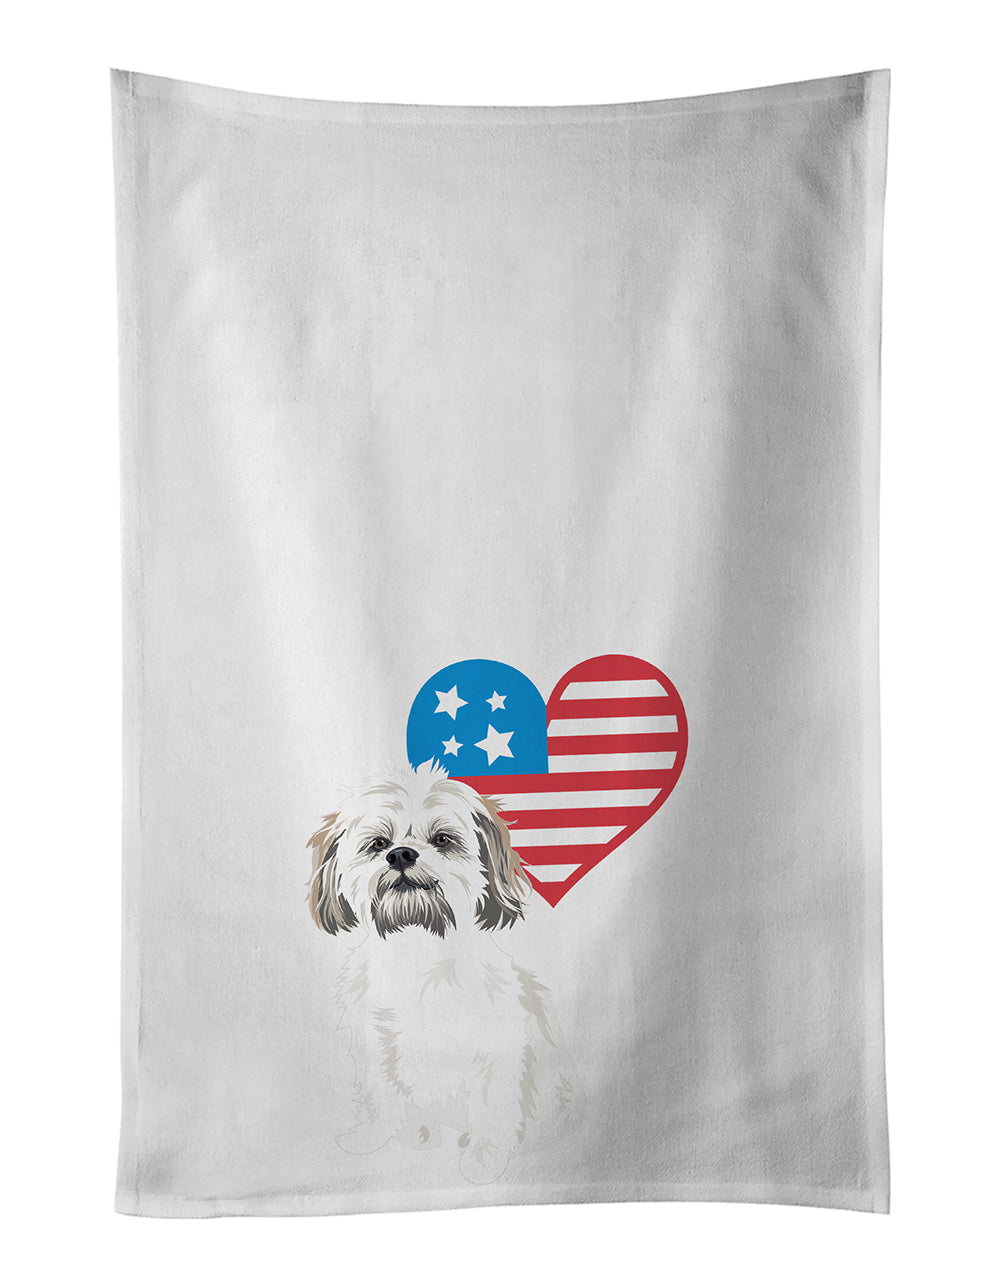 Buy this Shih-Tzu Silver Gold and White #1 Patriotic White Kitchen Towel Set of 2